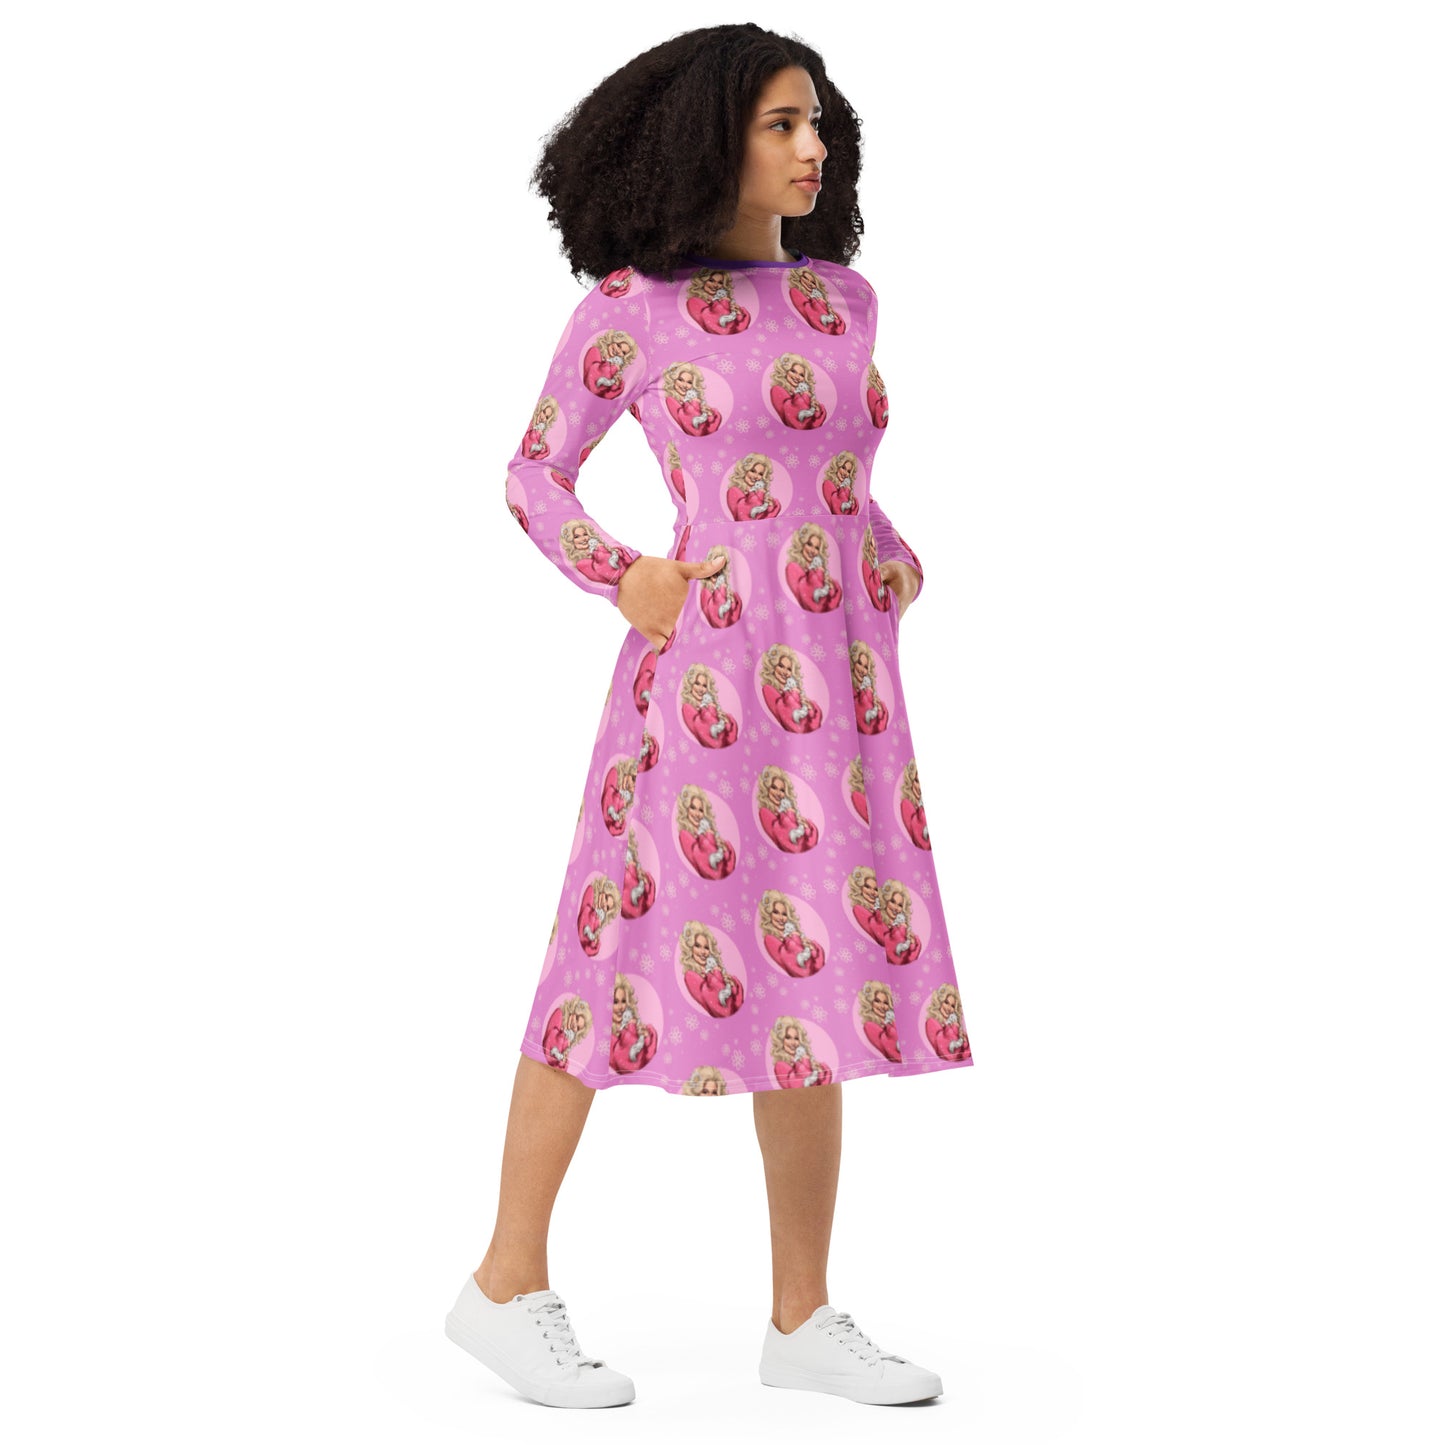 "The Country Queen" All-over print long sleeve midi dress